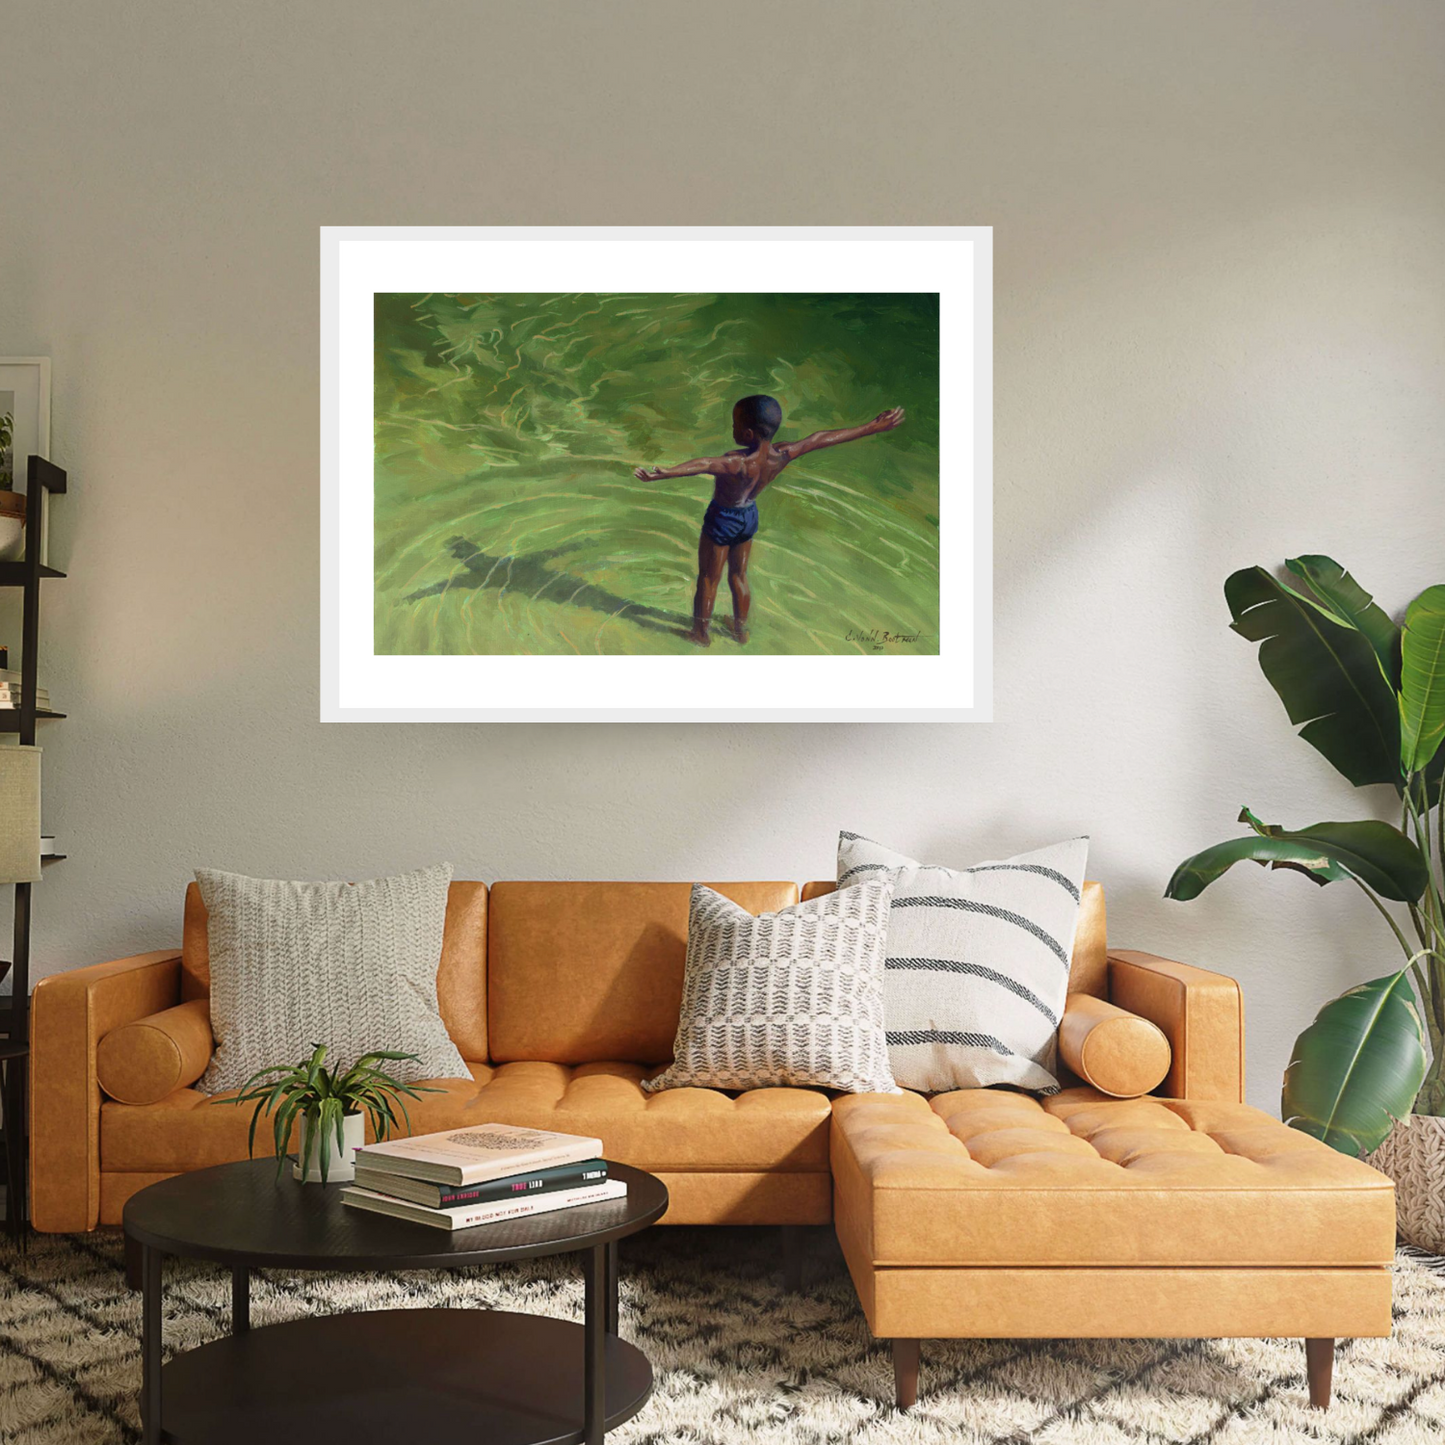 White framed print ‘Me’ by Colin Bootman is a vibrant contemporary landscape where a boy wearing a swimming suit is seen from above, standing with open arms in a bright green river water 